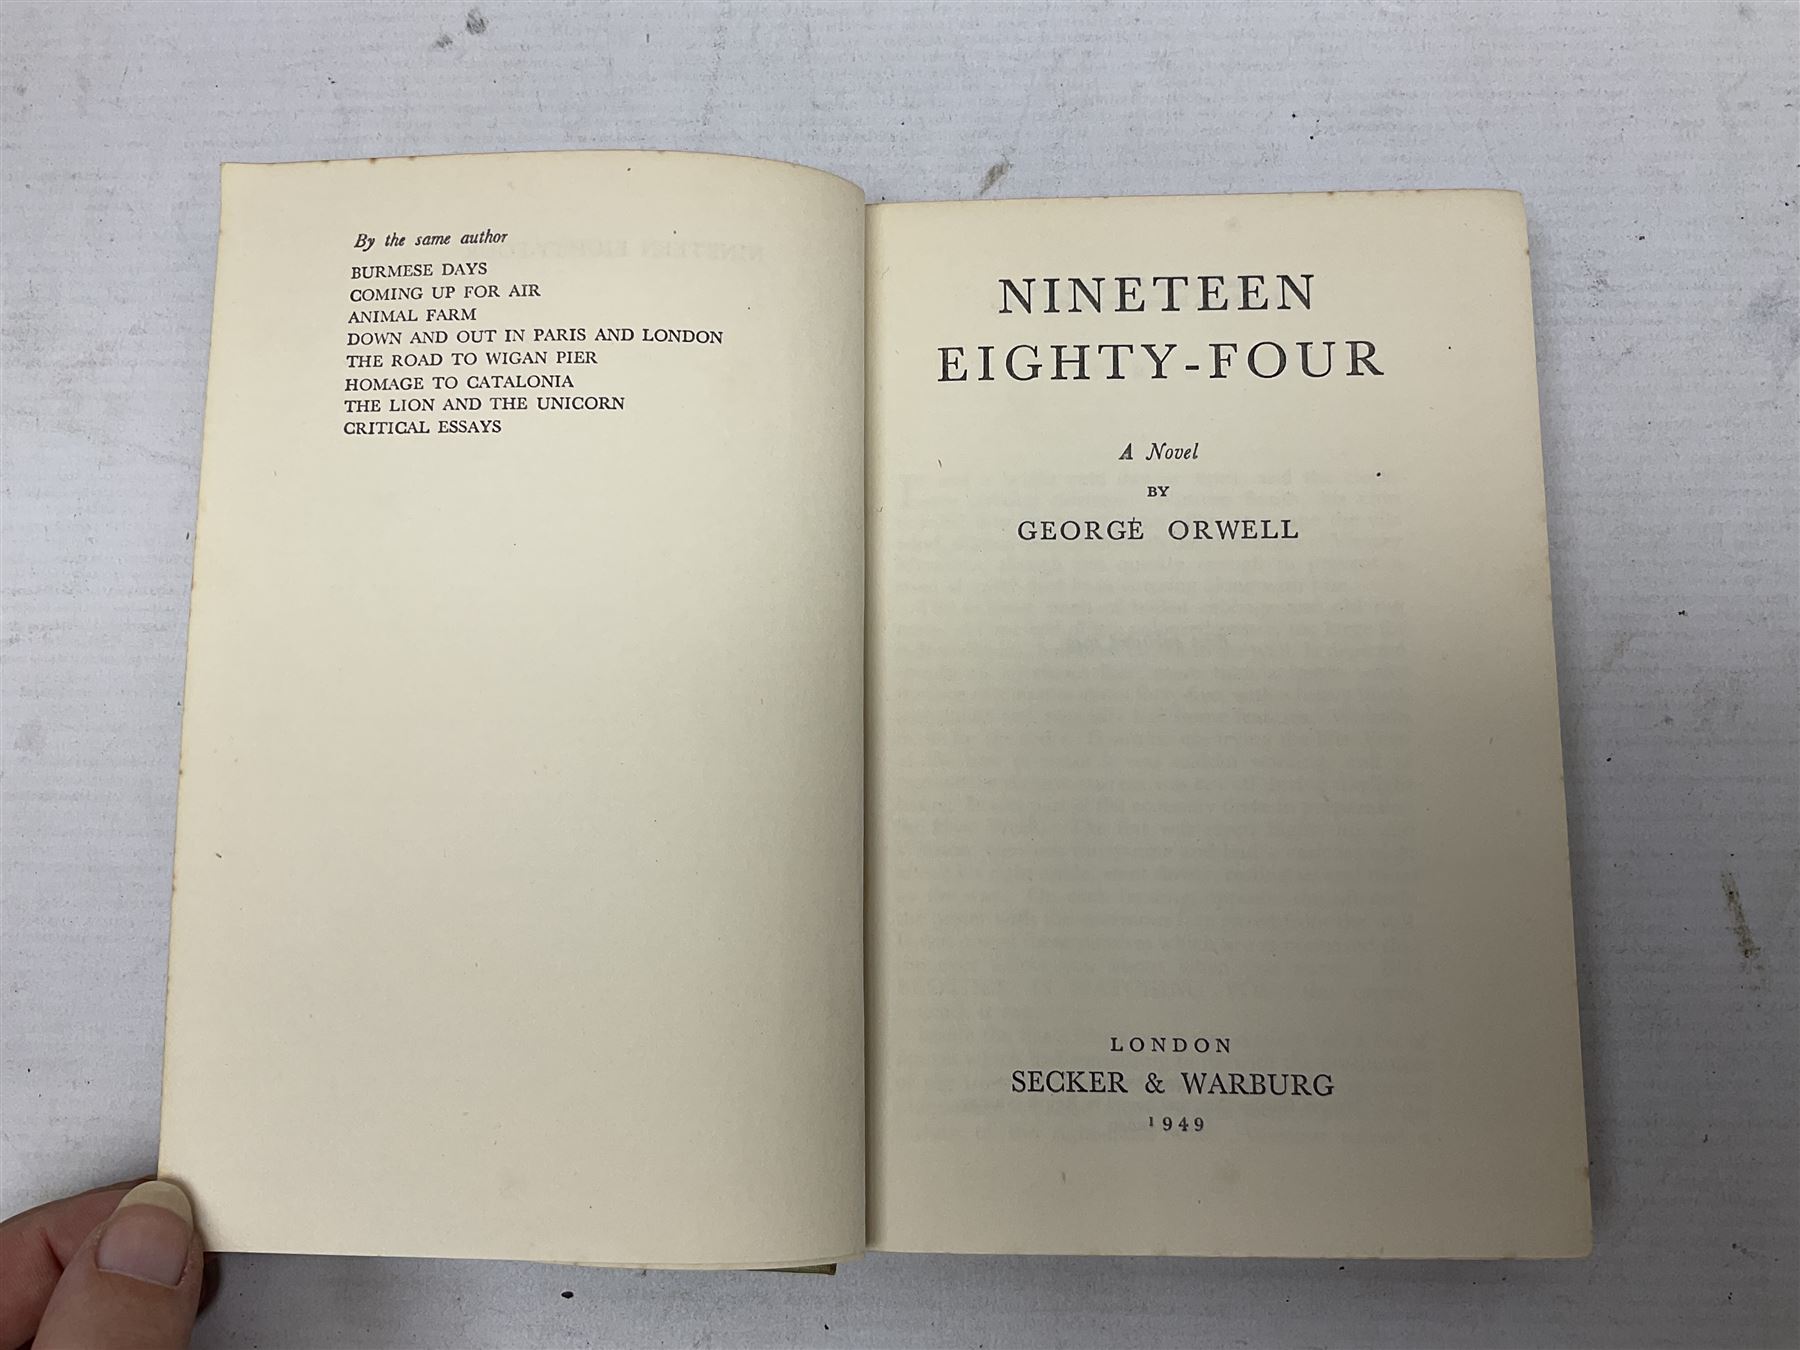 Orwell George: Nineteen eighty-four. 1949. First edition. Secker & Warburg. Green cloth binding. - Image 5 of 9